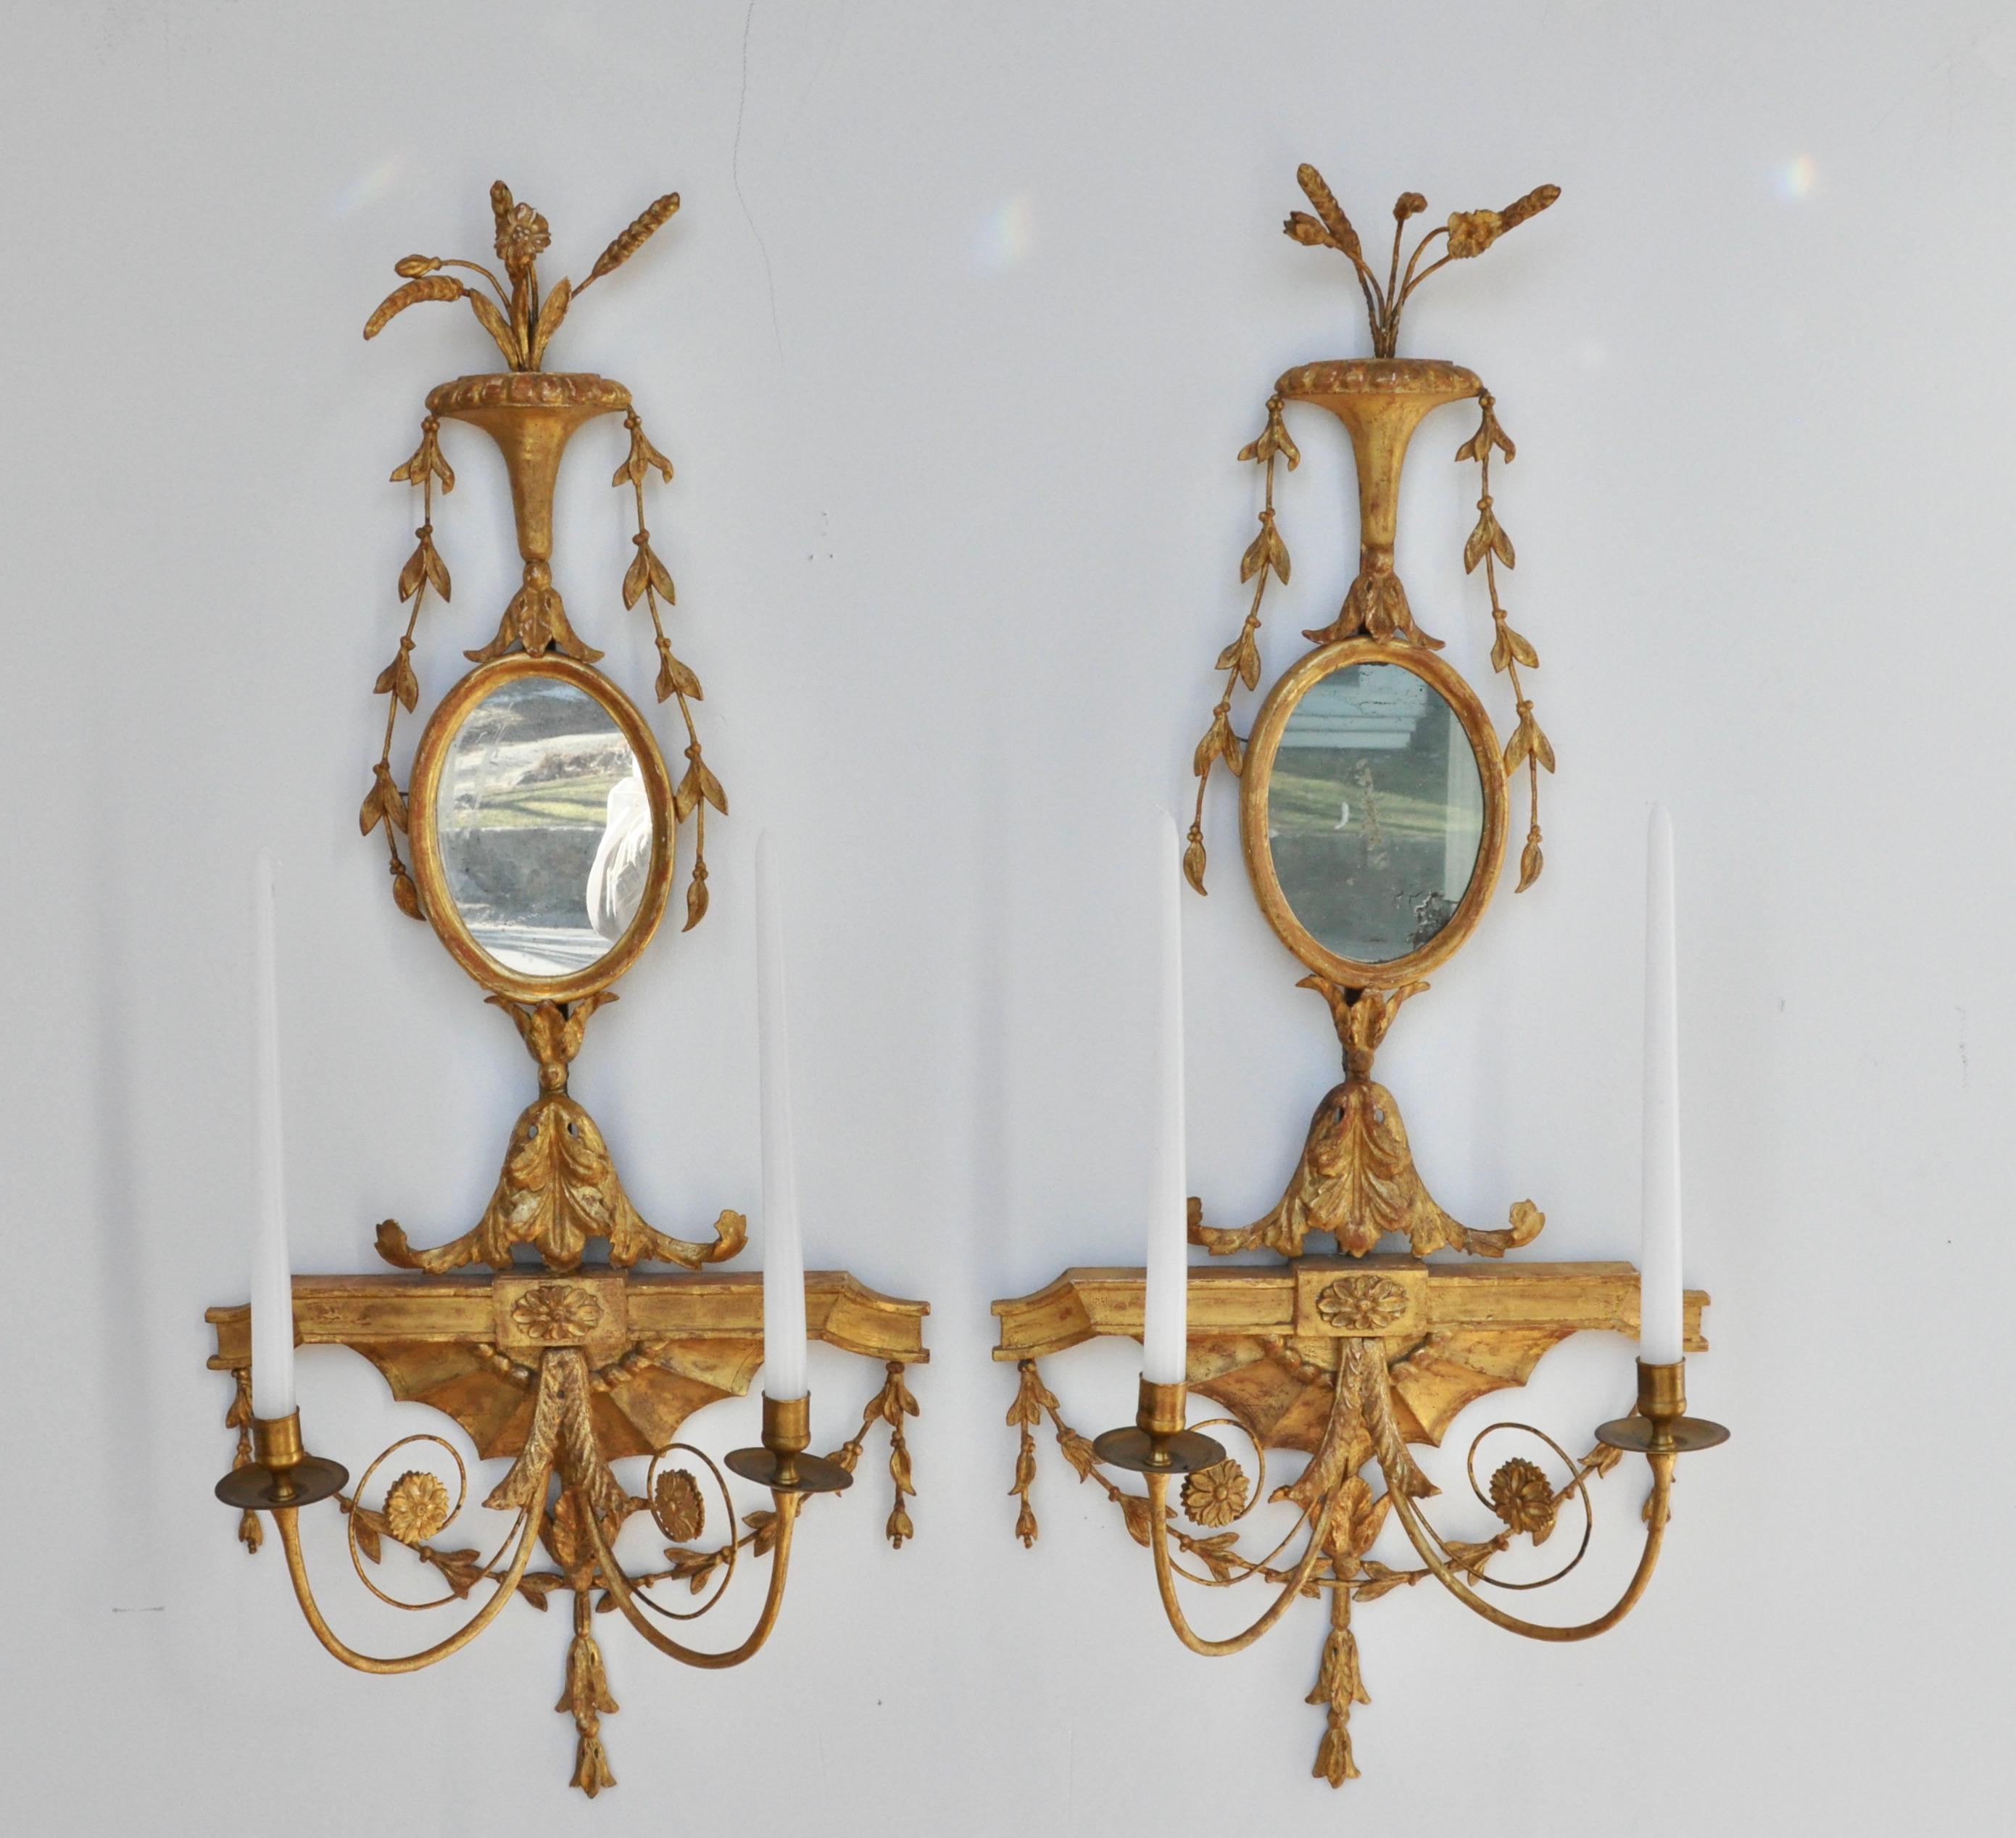 Pair of early 19th century Adam giltwood and mirrored sconces of the George III period

Original gilding. Quite desirable.